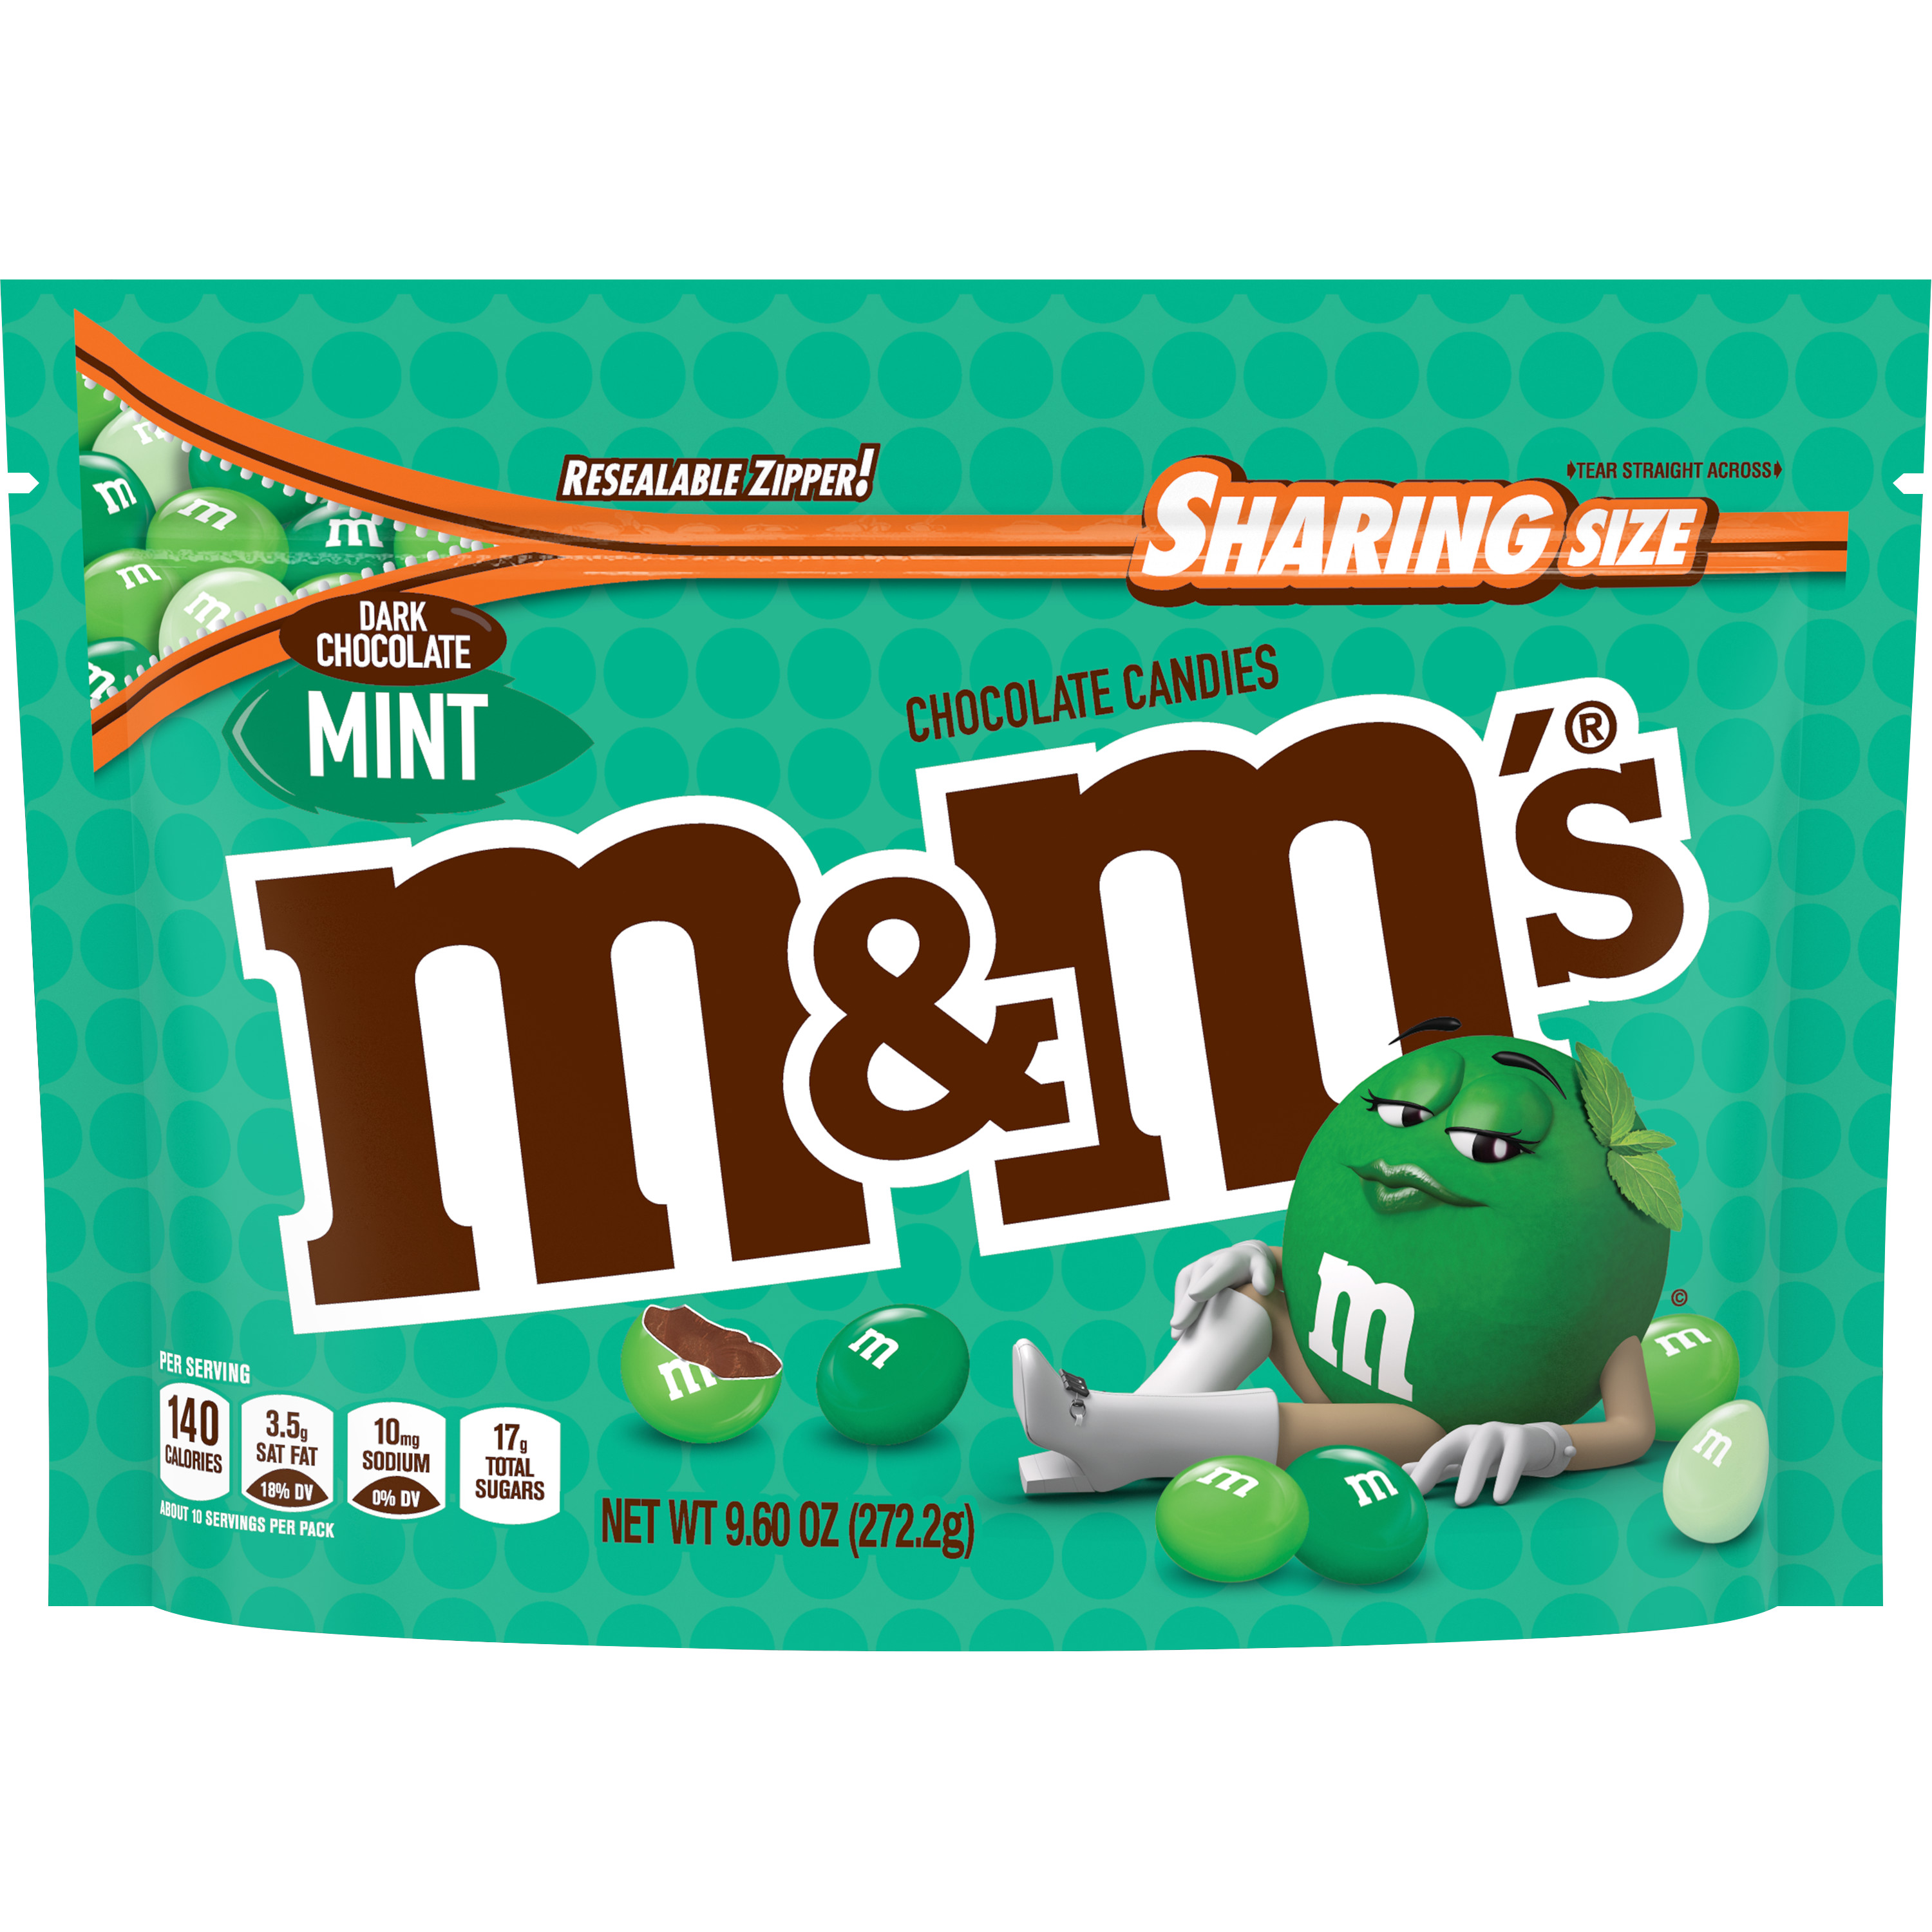 M&M's Dark Chocolate Mint Candy, Sharing Size - 9.6 oz Bag - image 1 of 7